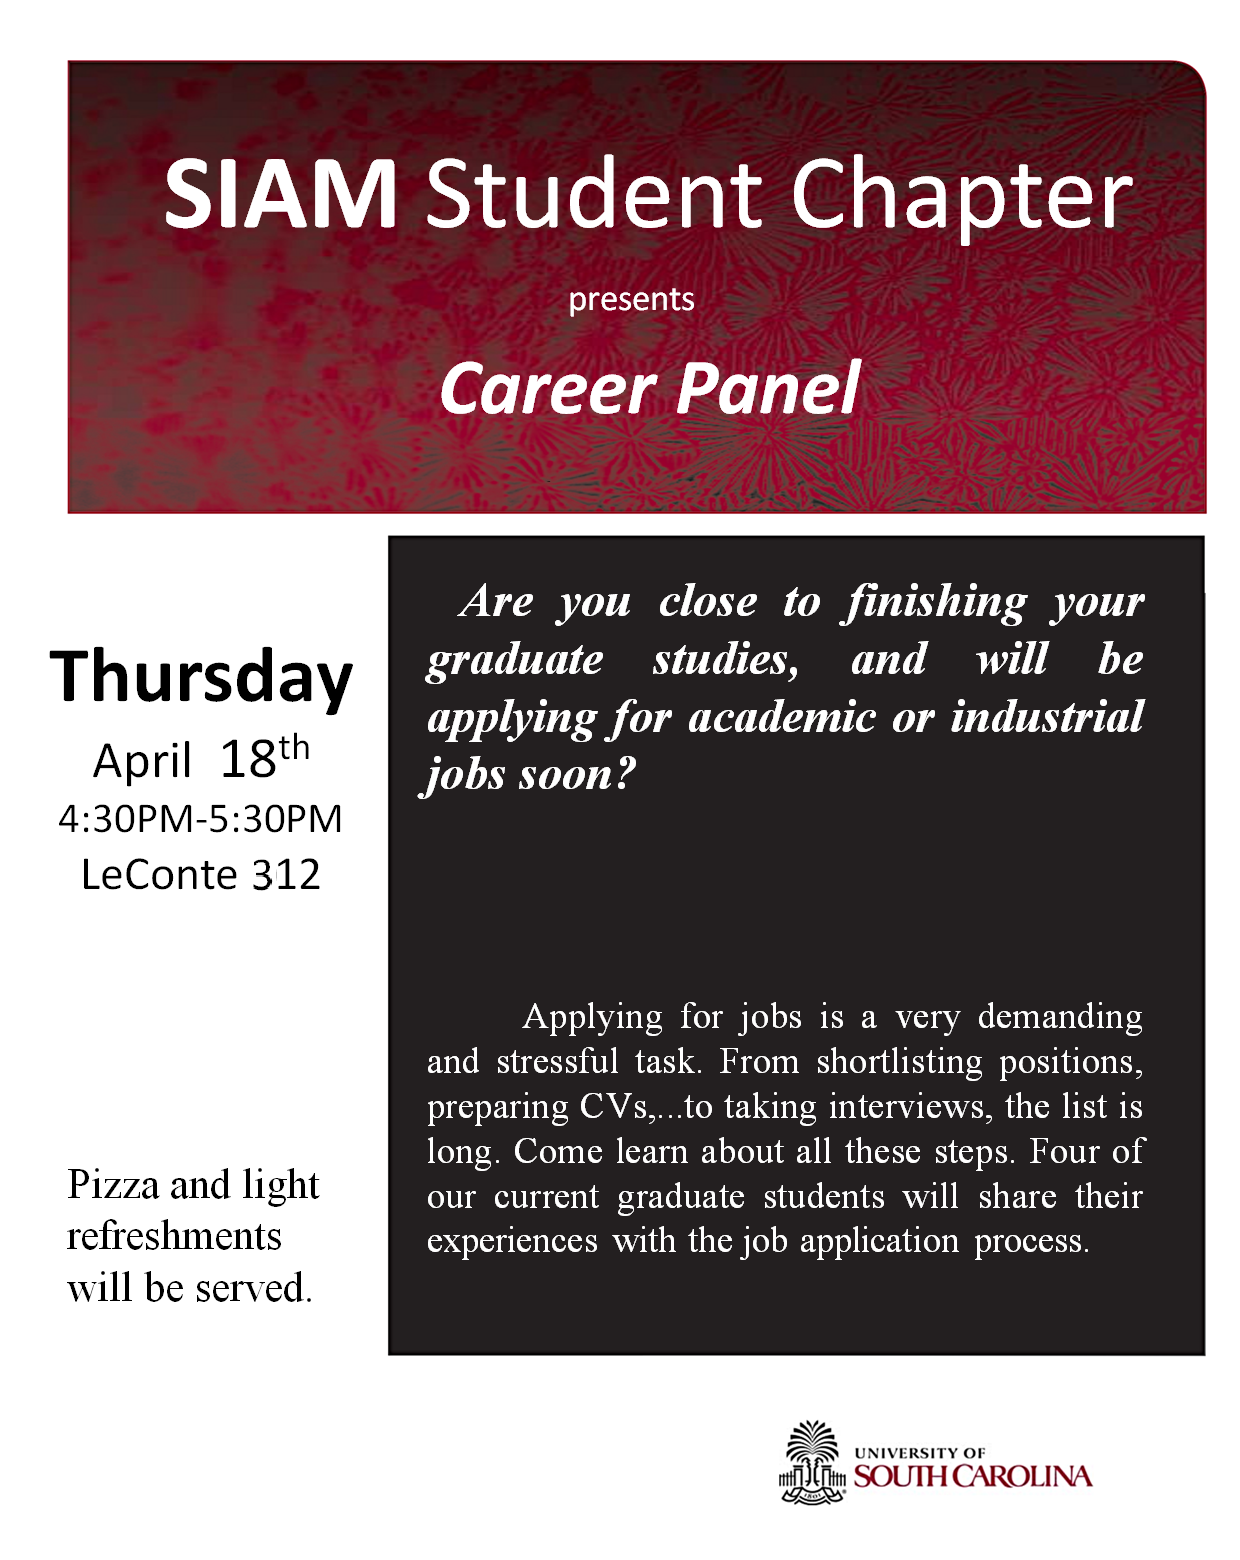 SIAM Event: Industry Careers and the Graduate School Experience